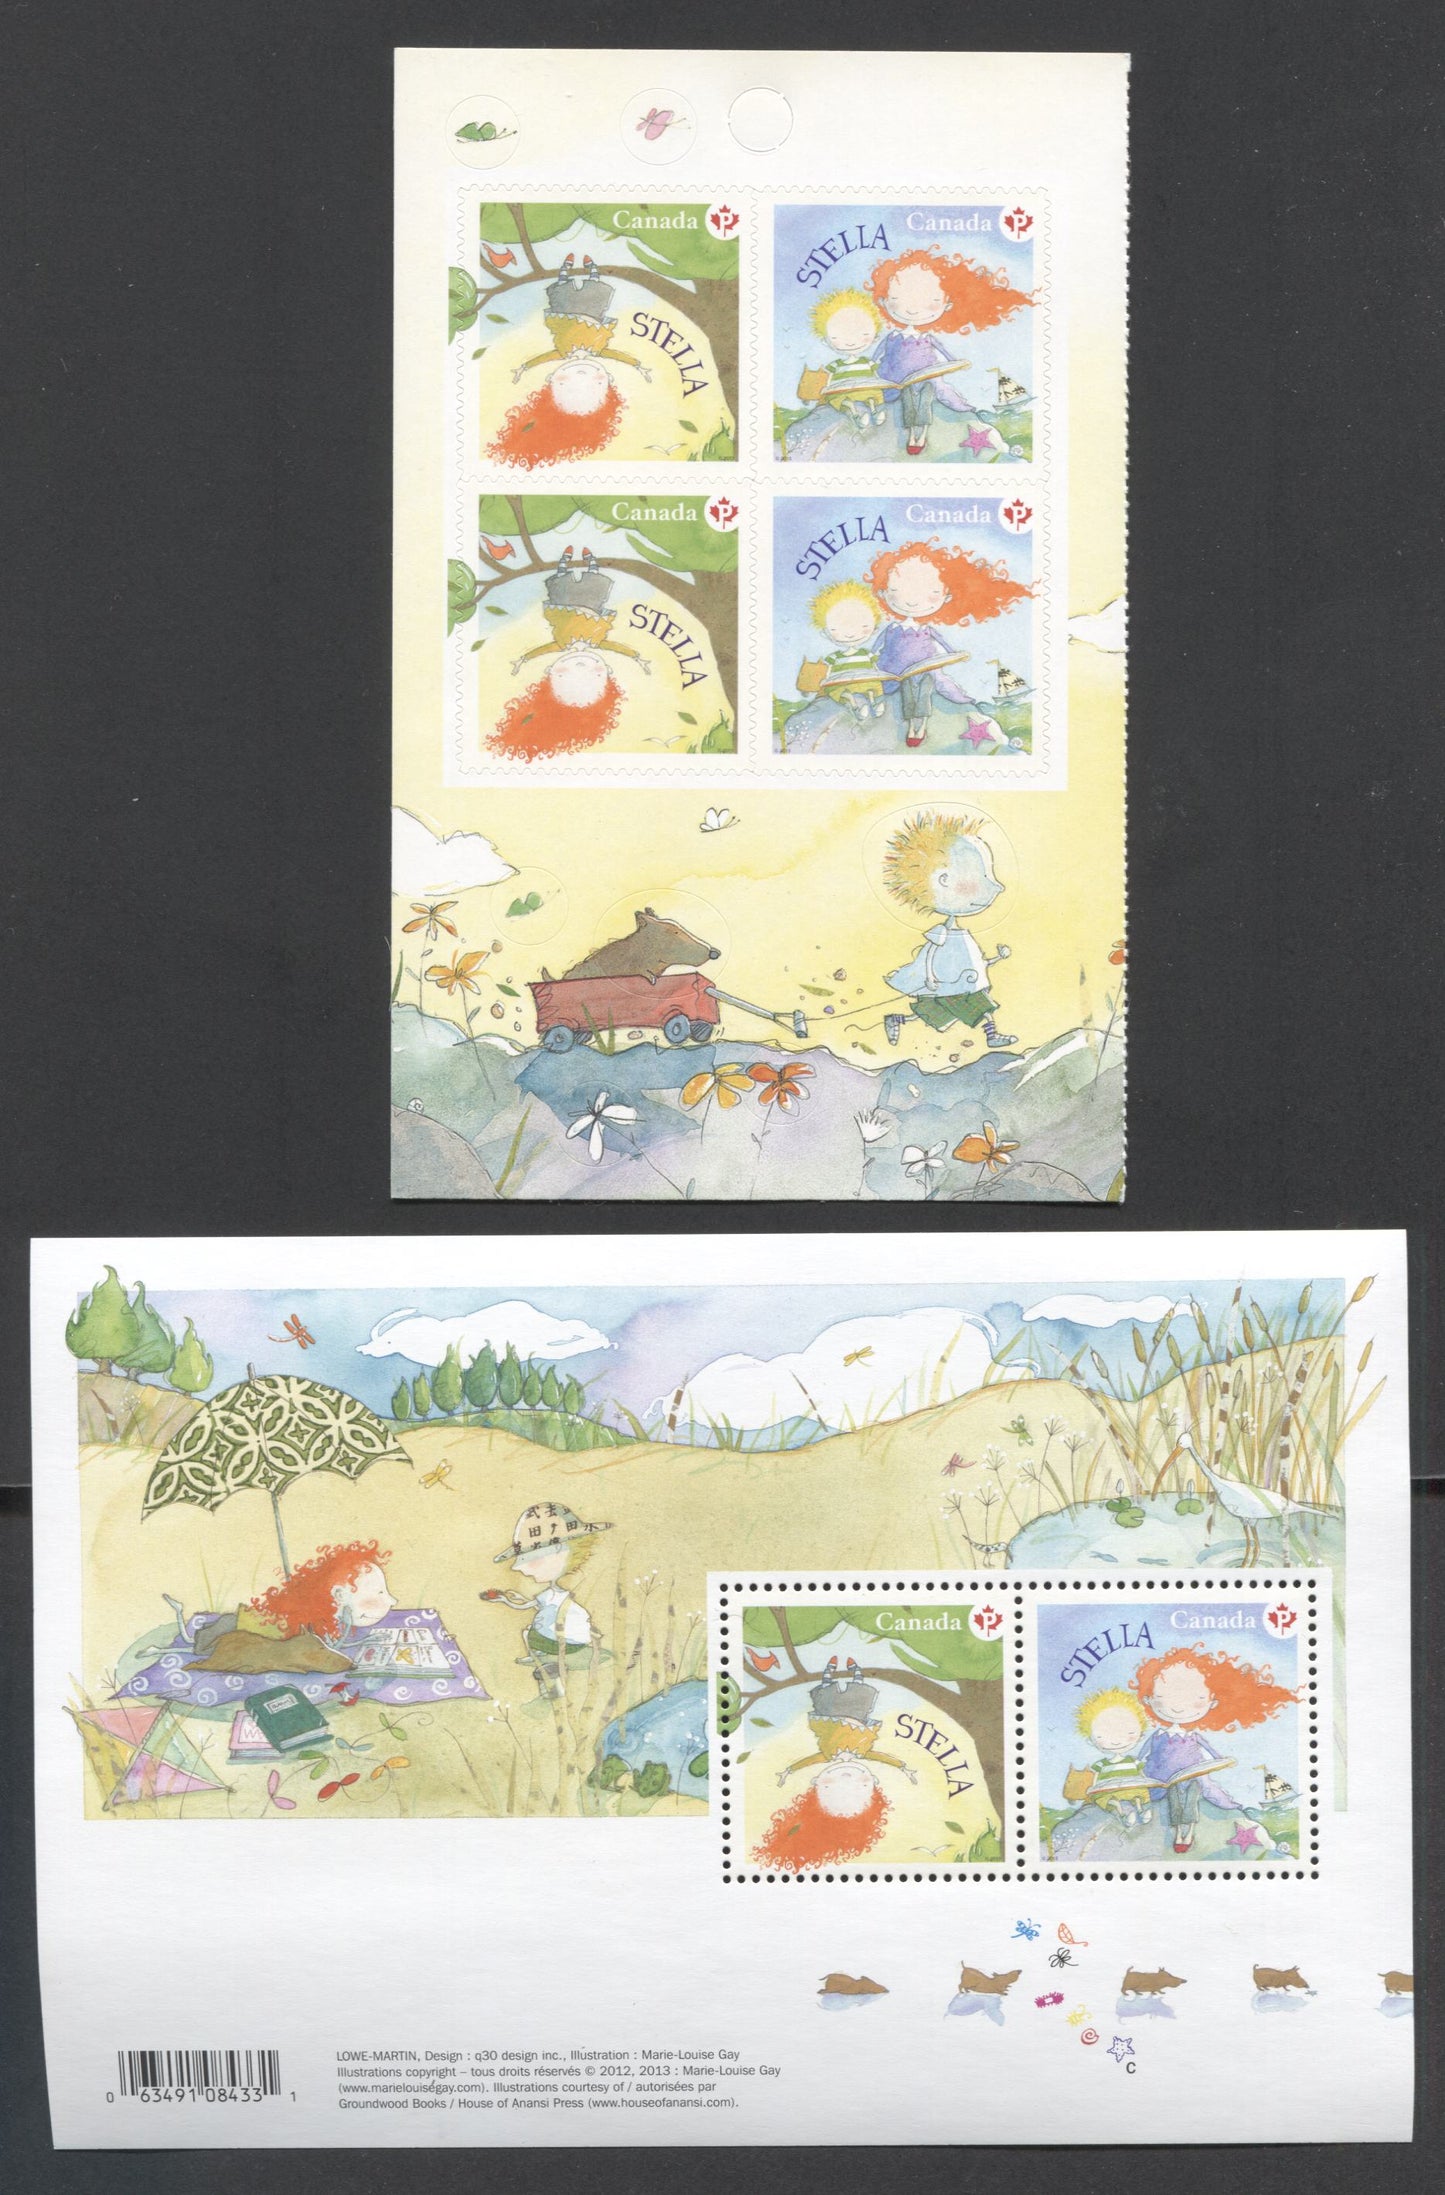 Lot 4 Canada #2652-2654 P(63c) Multicolored Hanging From Tree-Reading Book, 2013 Stella, 2 VFNH Booklet Pane Of 4 & Souvenir Sheetlet